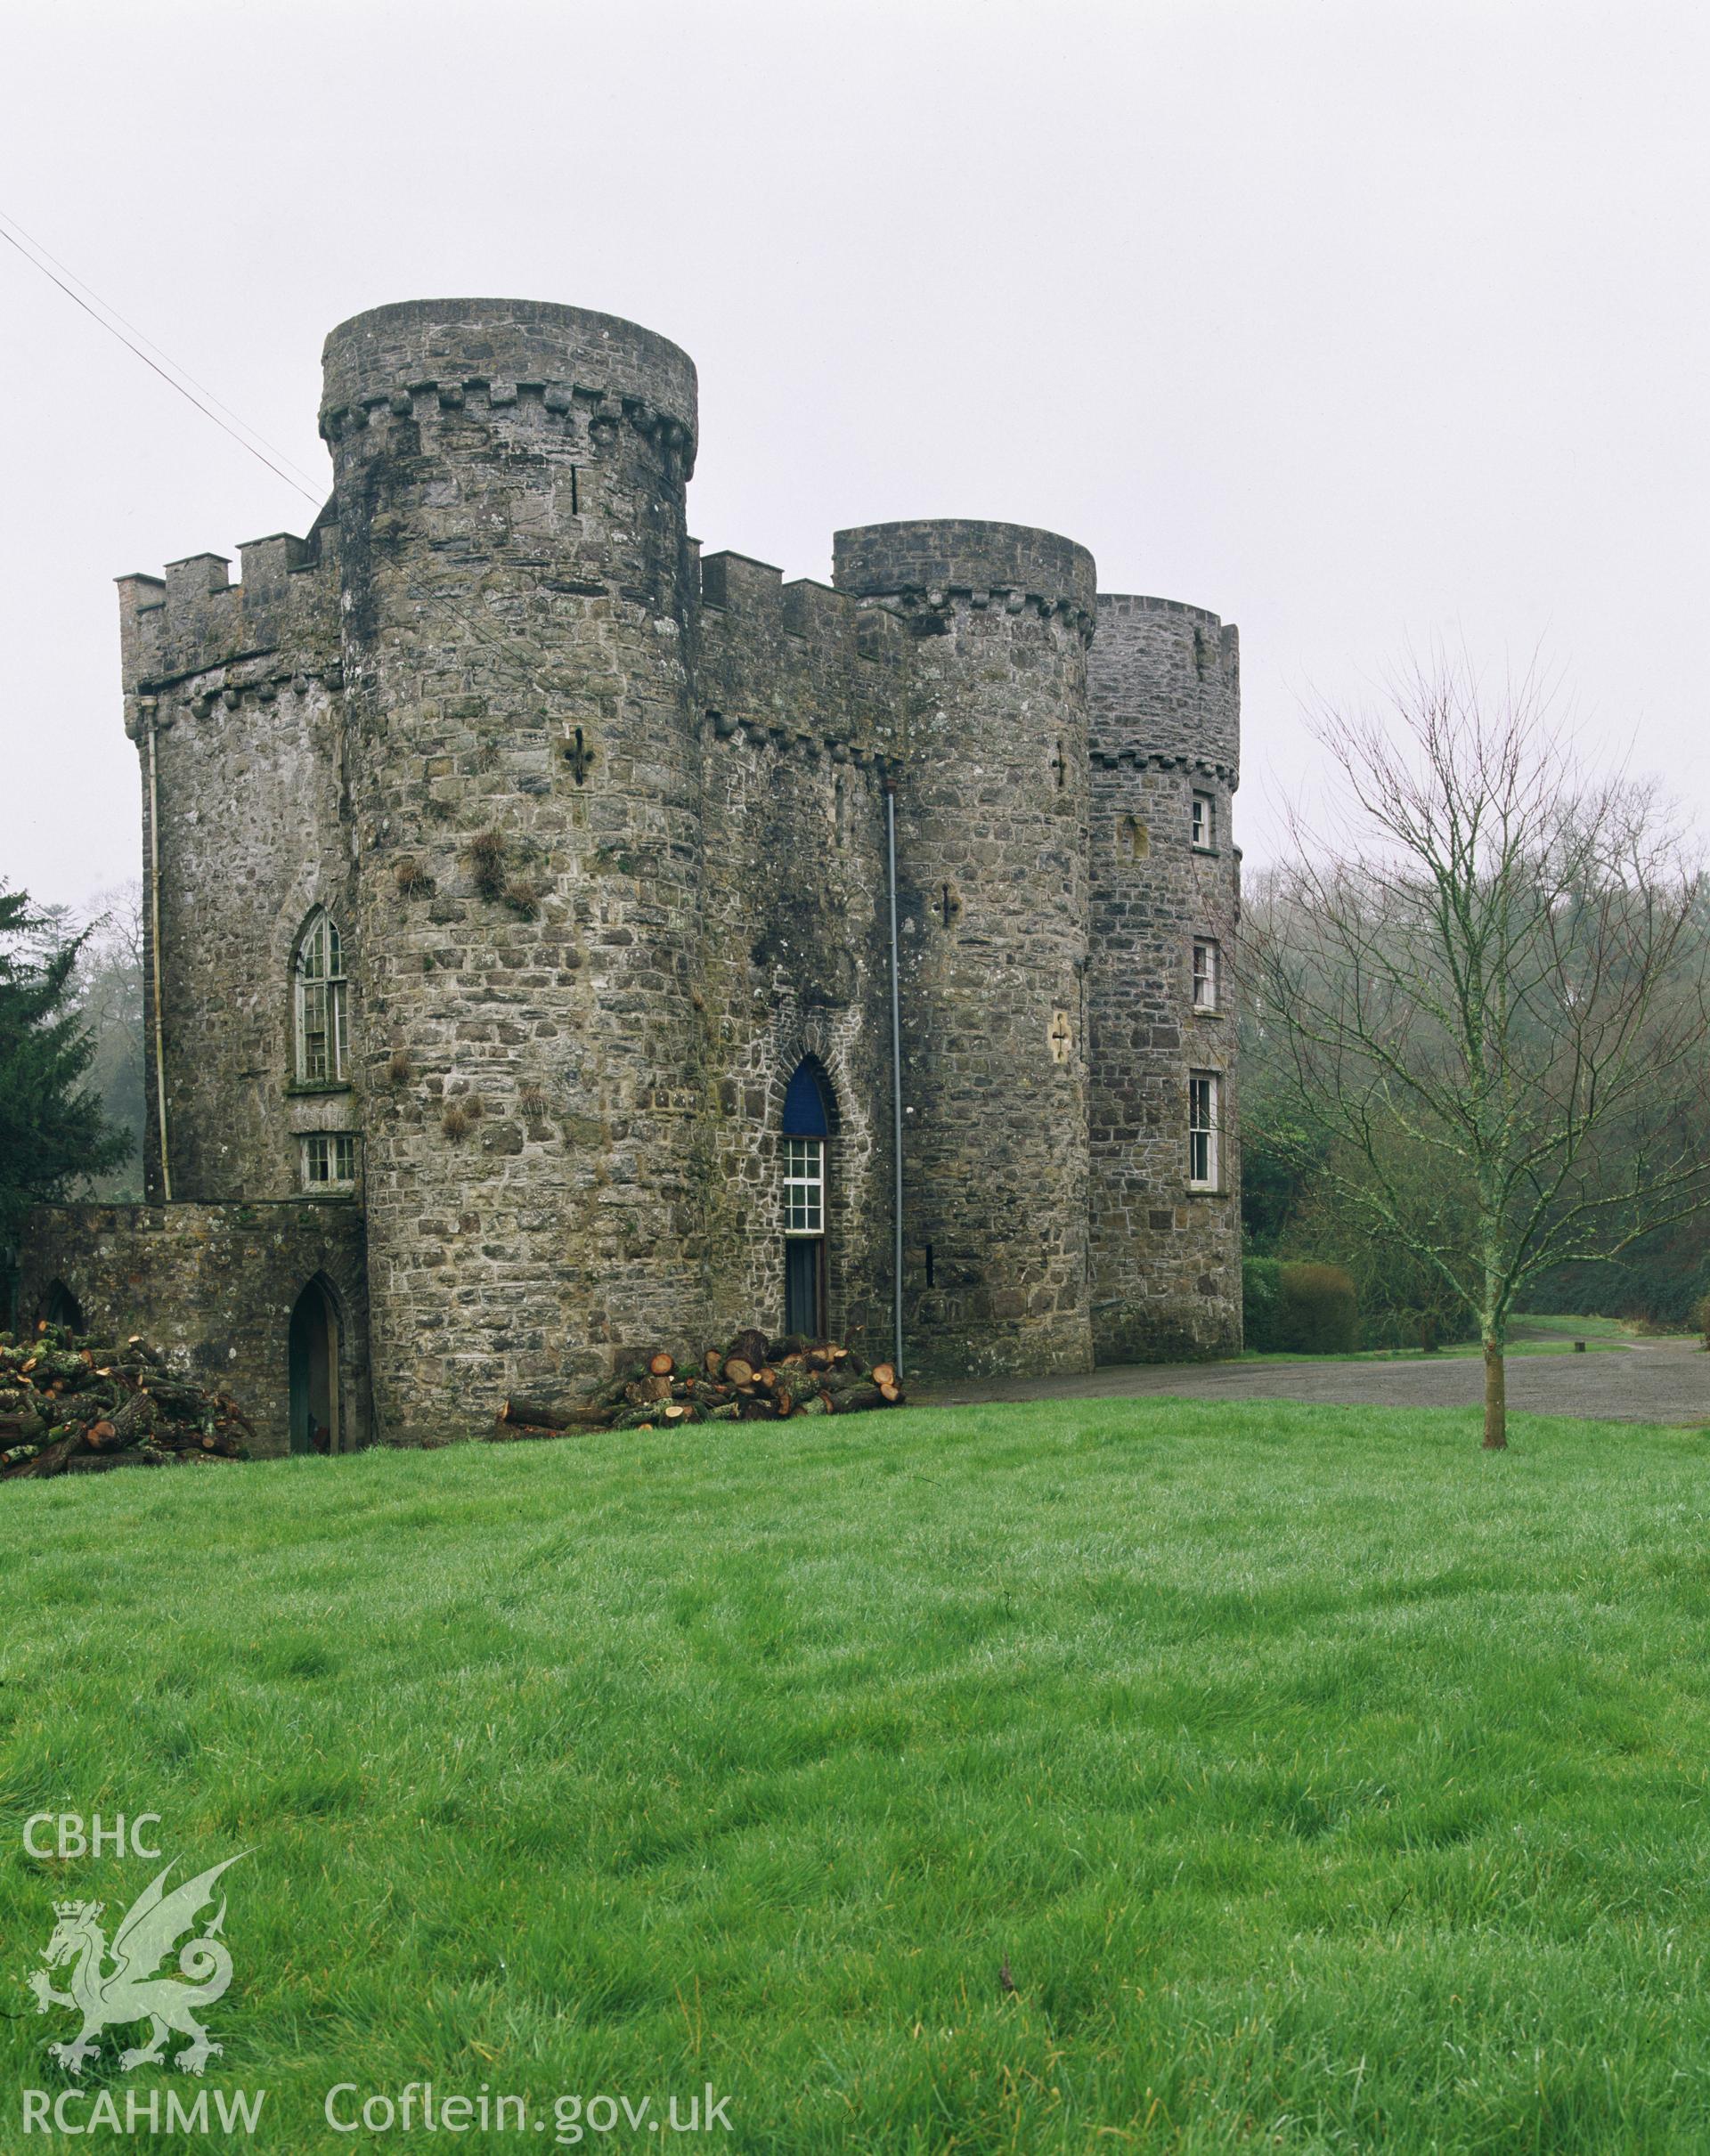 RCAHMW colour transparency showing Upton Castle, taken by Iain Wright, 2003.